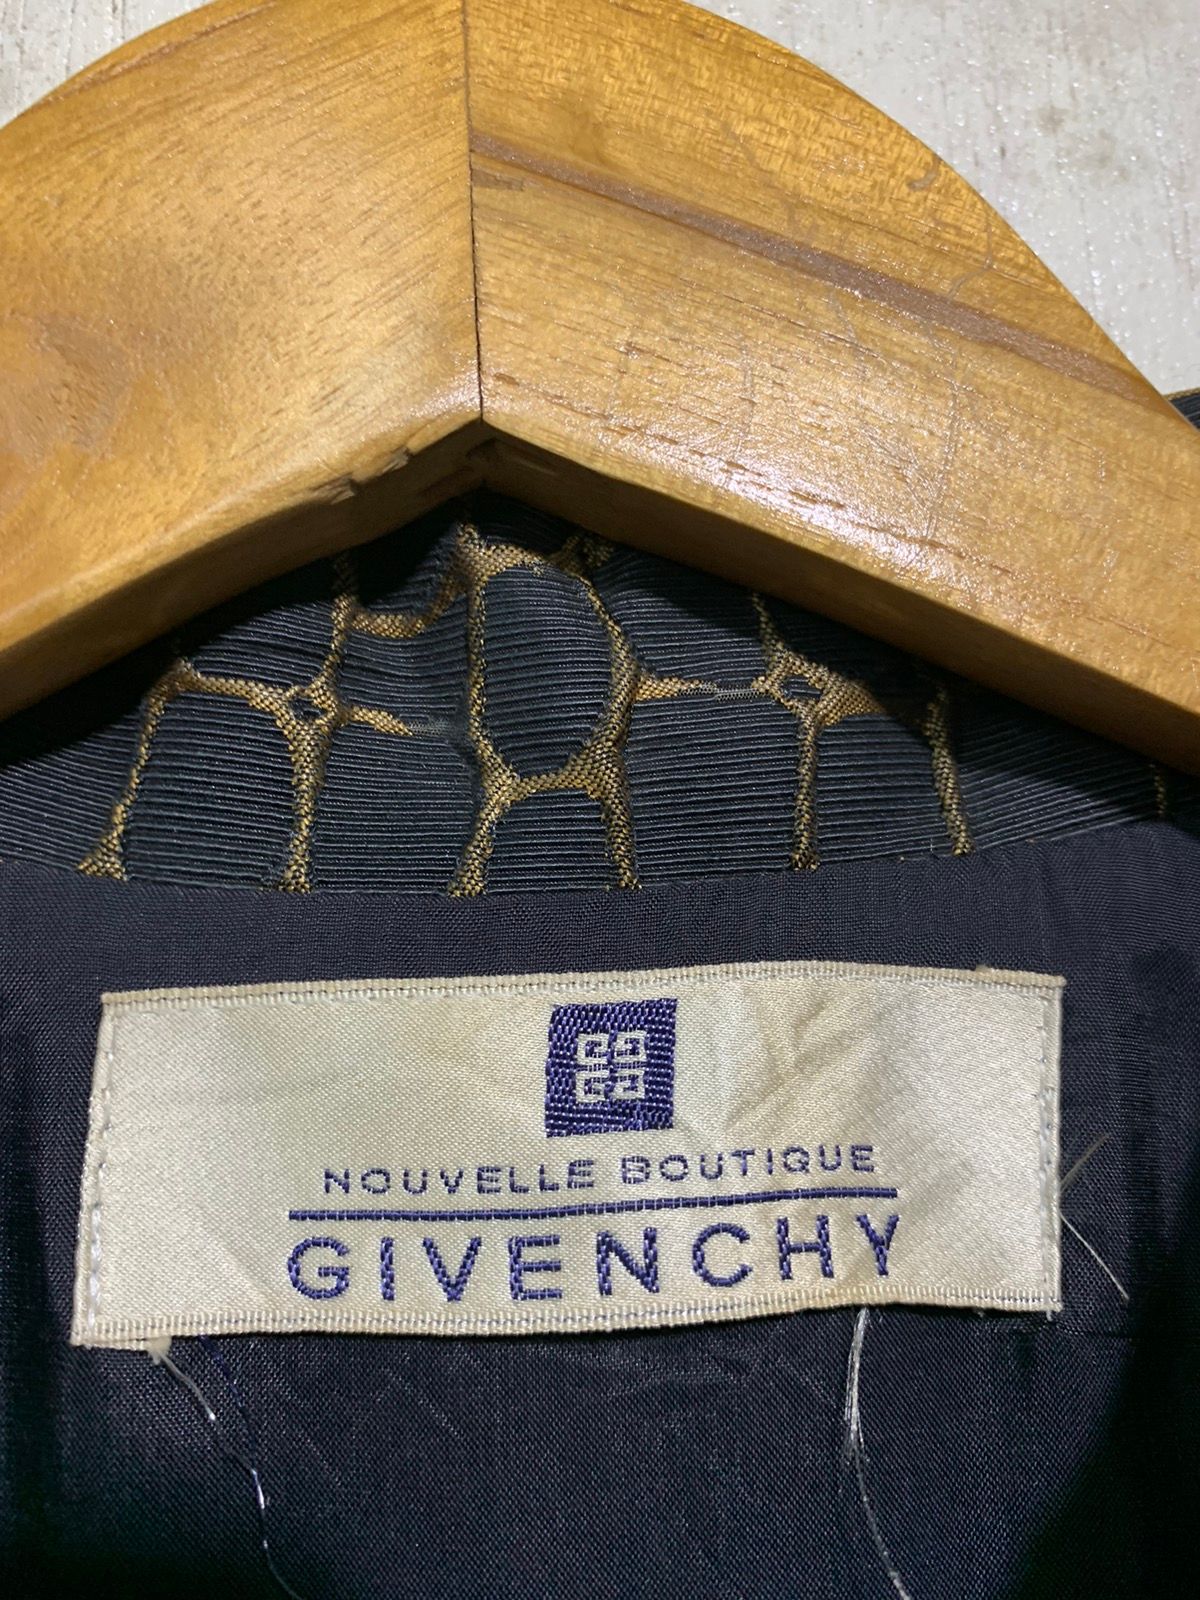 🔥GIVENCHY NOUVELLE BOUTIQUE GOLD EMBROIDERY WEB JACKETS - 8